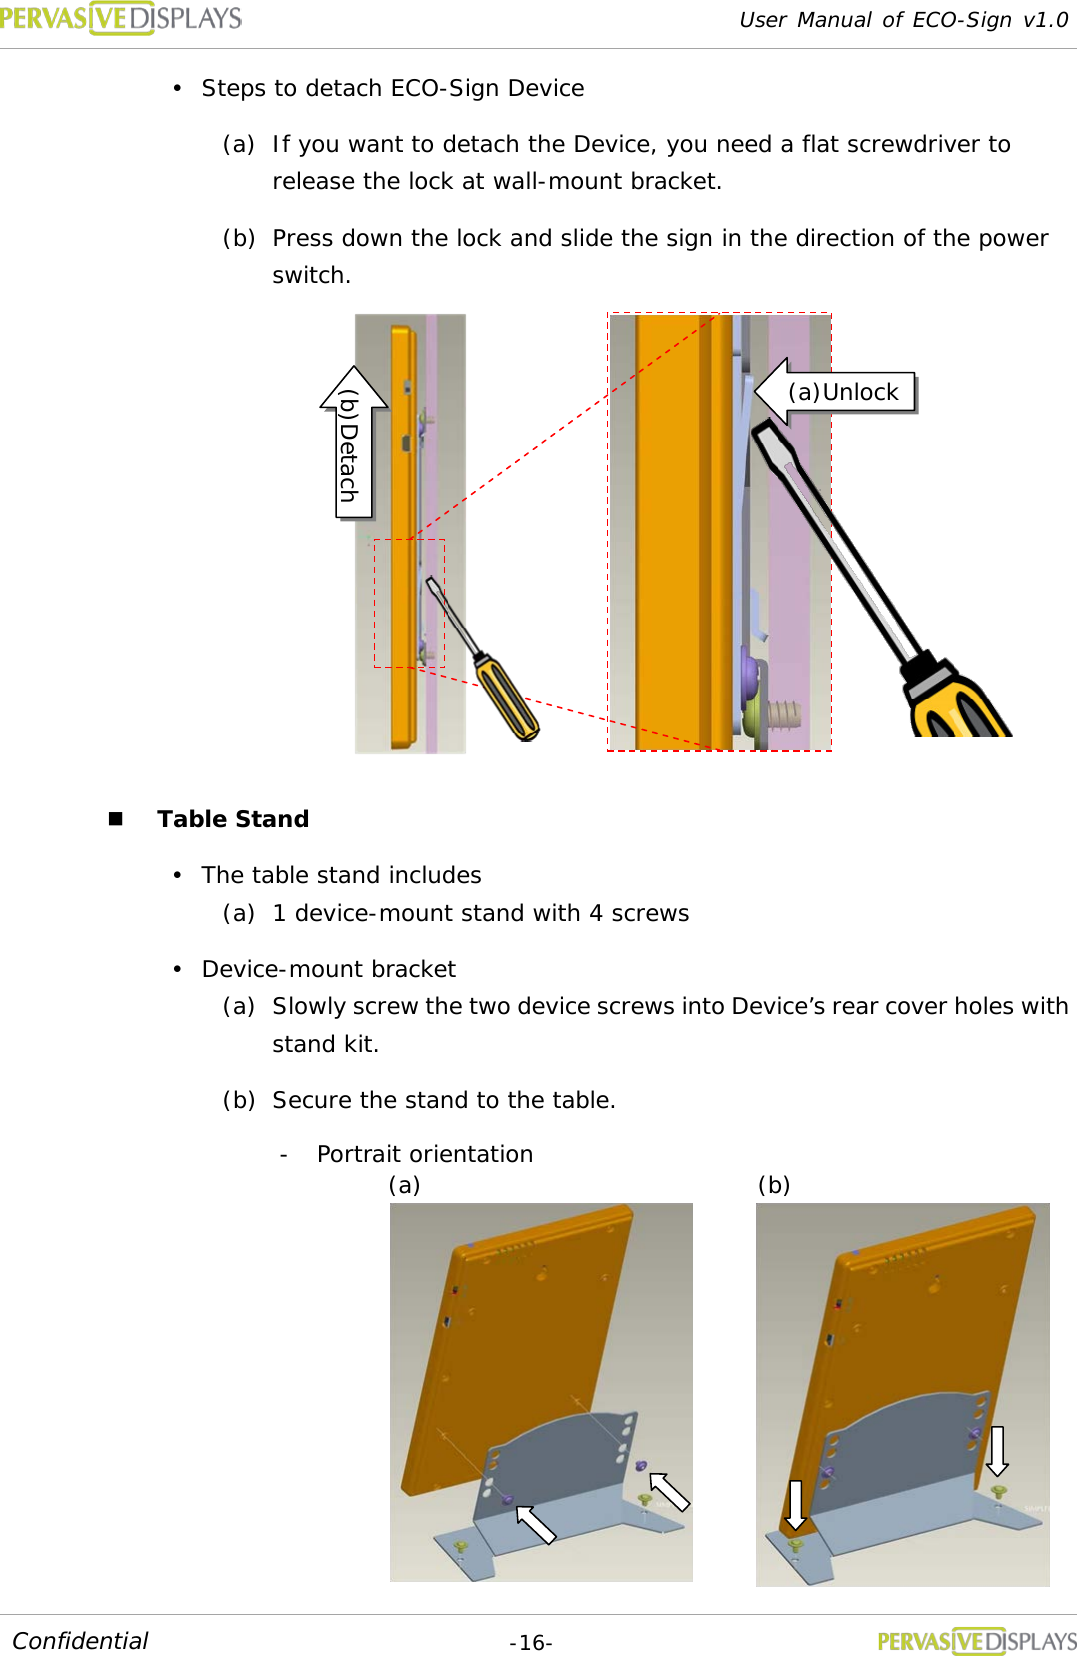 User Manual of ECO-Sign v1.0  -16- Confidential  Steps to detach ECO-Sign Device (a) If you want to detach the Device, you need a flat screwdriver to release the lock at wall-mount bracket. (b) Press down the lock and slide the sign in the direction of the power switch.   Table Stand  The table stand includes (a) 1 device-mount stand with 4 screws  Device-mount bracket (a) Slowly screw the two device screws into Device’s rear cover holes with stand kit. (b) Secure the stand to the table.  - Portrait orientation (a) (b) (a)Unlock (b)Detach 